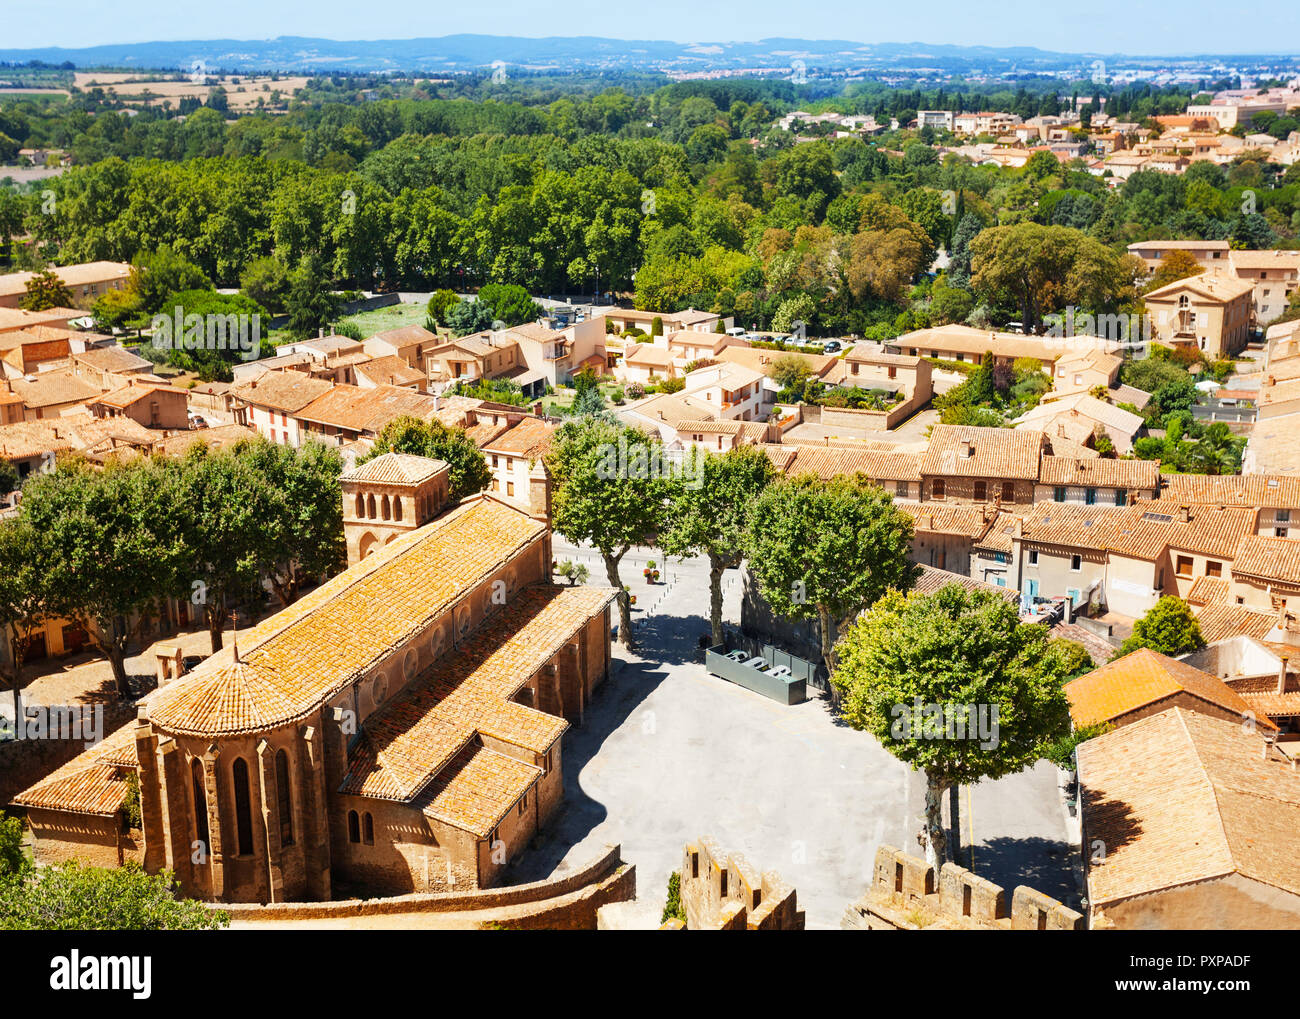 Aerial view of St. Gimer church from the western wall of Carcassonne citadel at sunny day Stock Photo